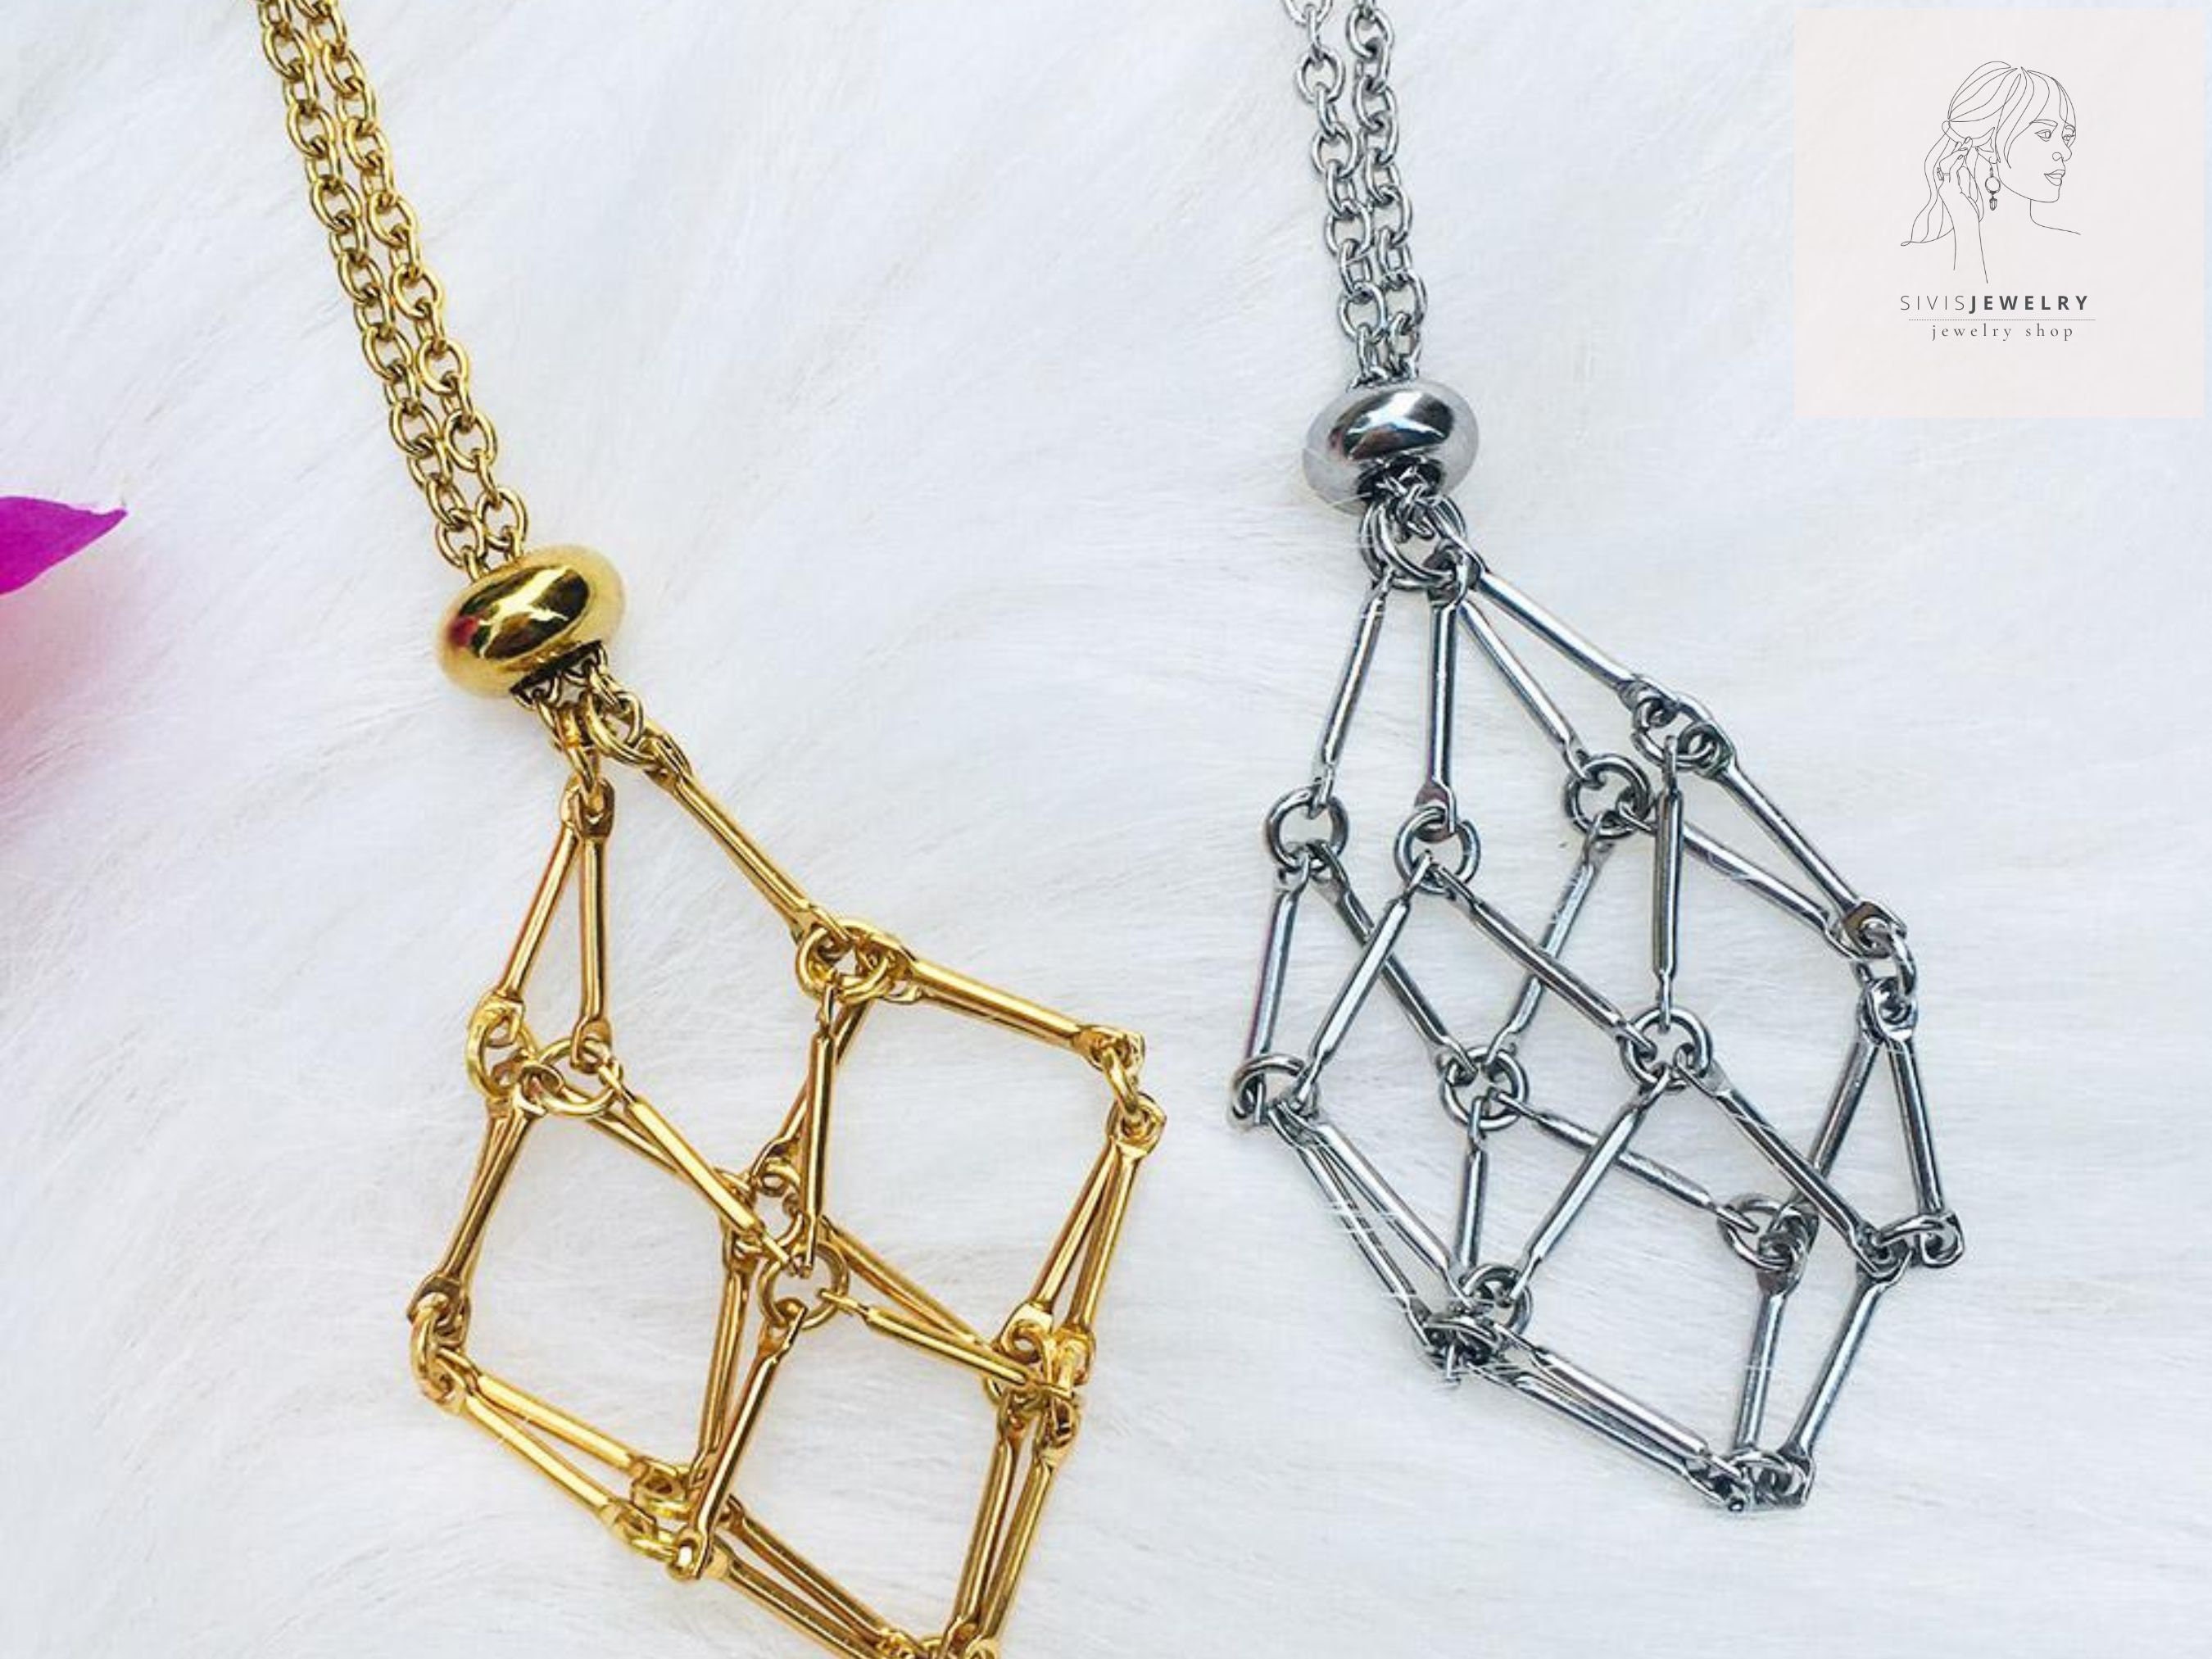 Design Crystal Cage Necklace Holder Net Pouch Metal Chain Stone